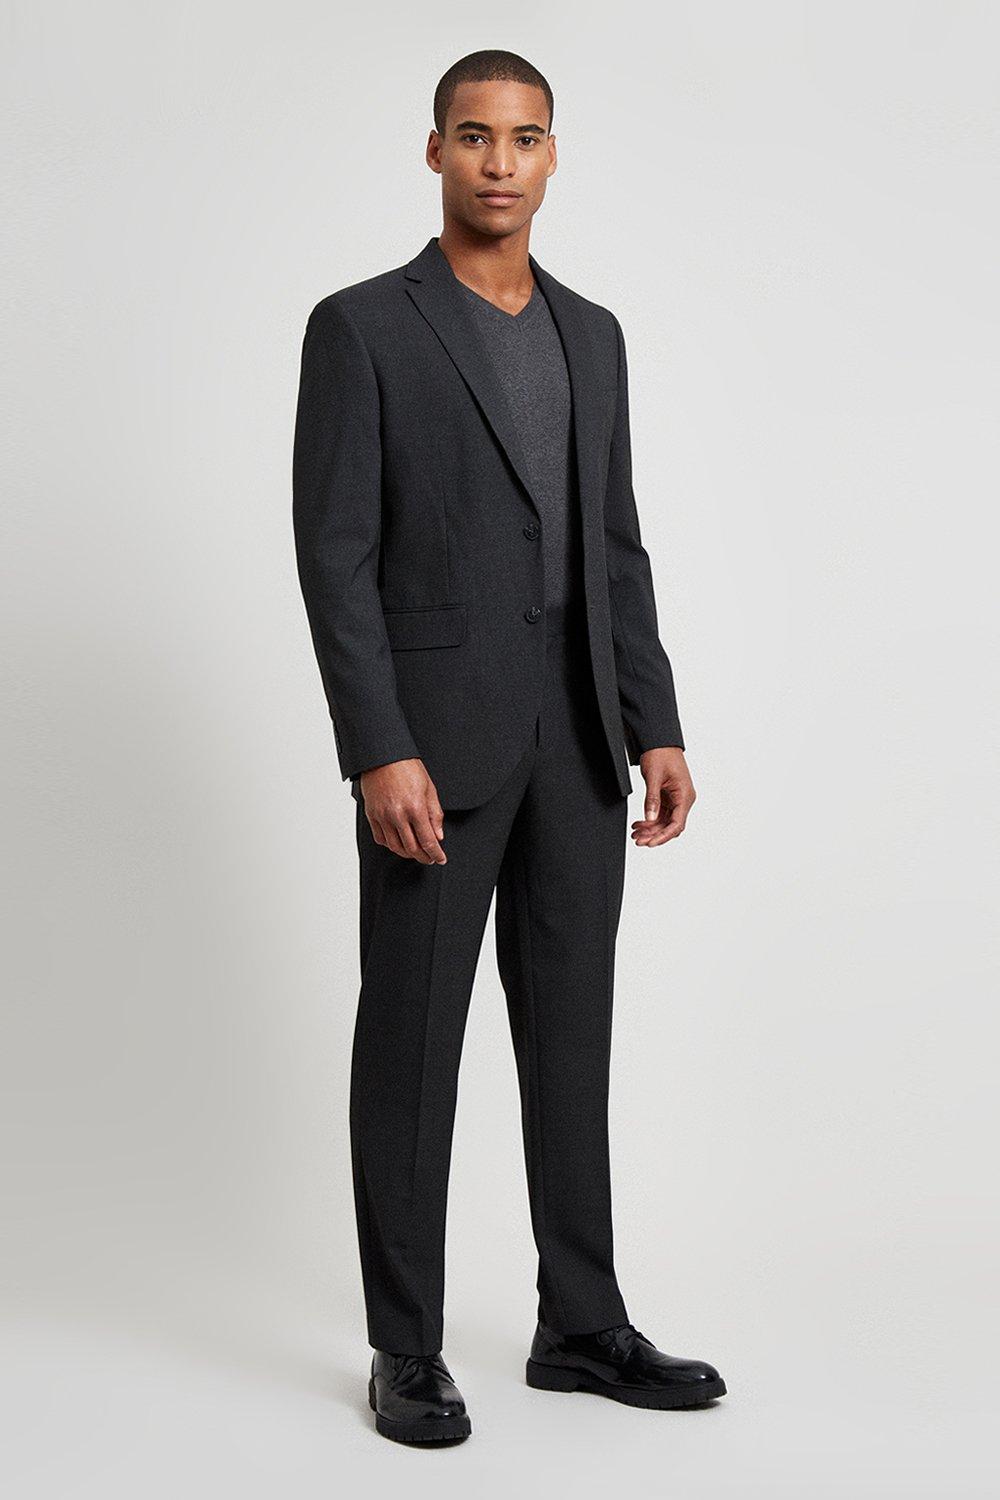 Suits | Tailored Fit Charcoal Essential Trousers | Burton